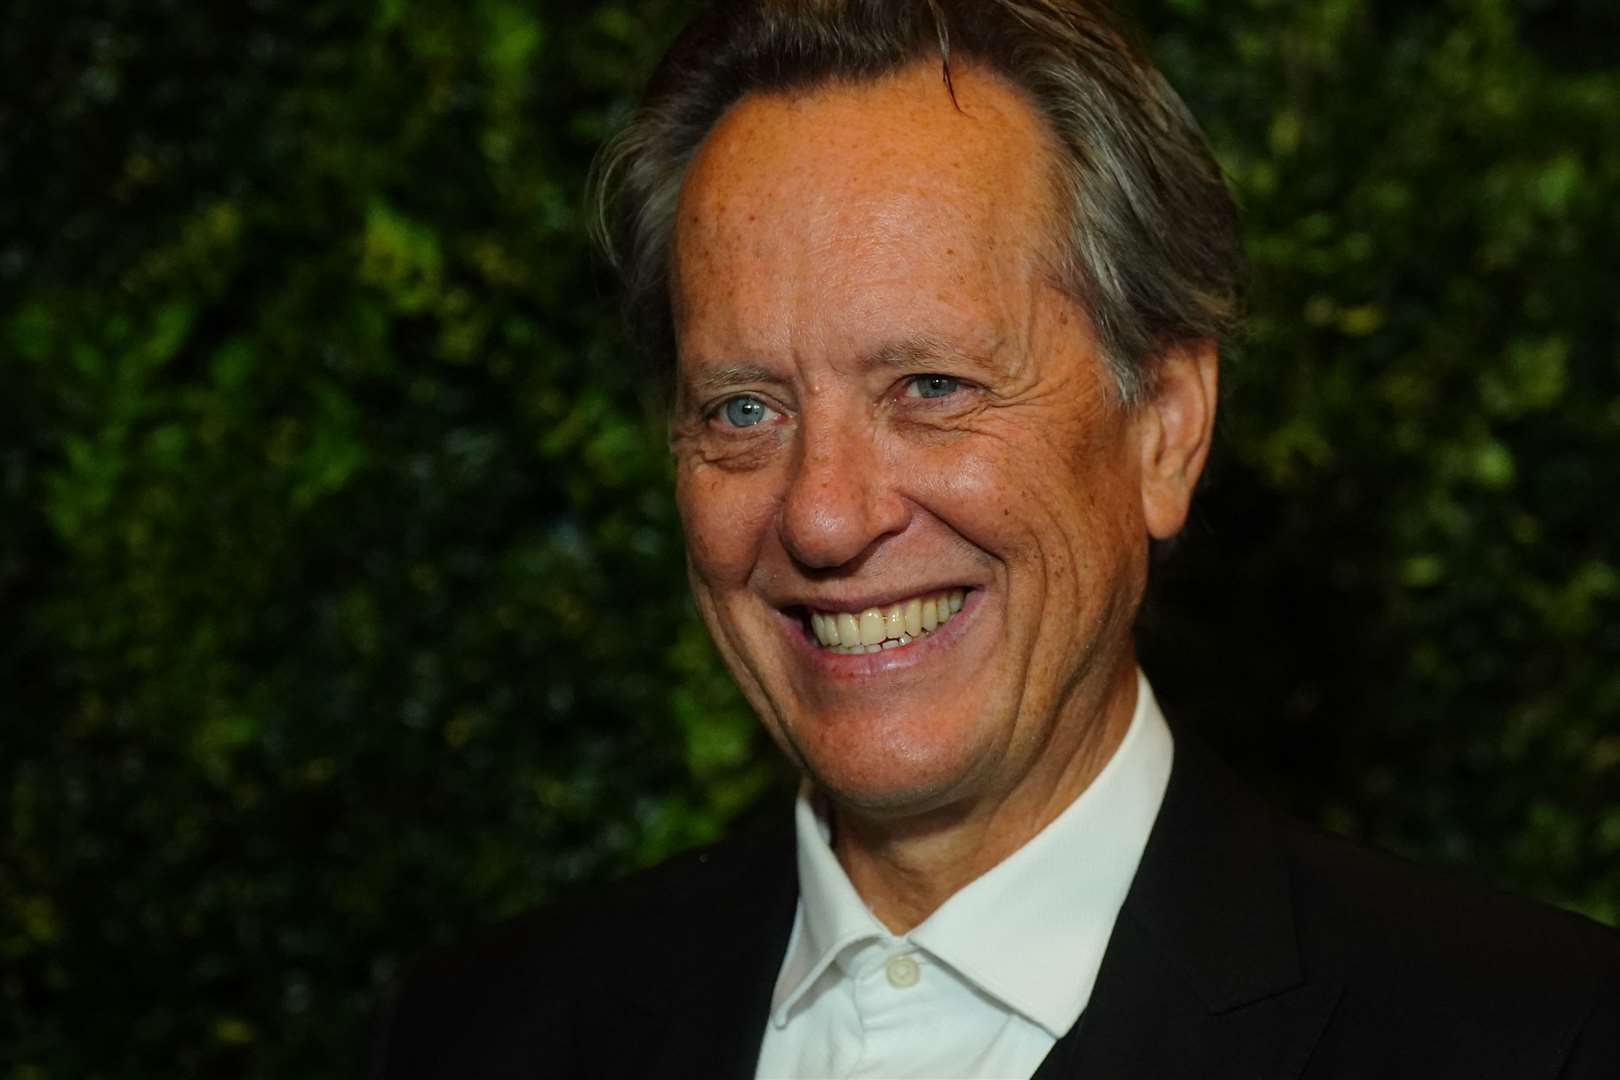 Richard E Grant attended the Bafta red carpet where his film, Saltburn, is nominated for the Outstanding British Film award (Victoria Jones/PA)